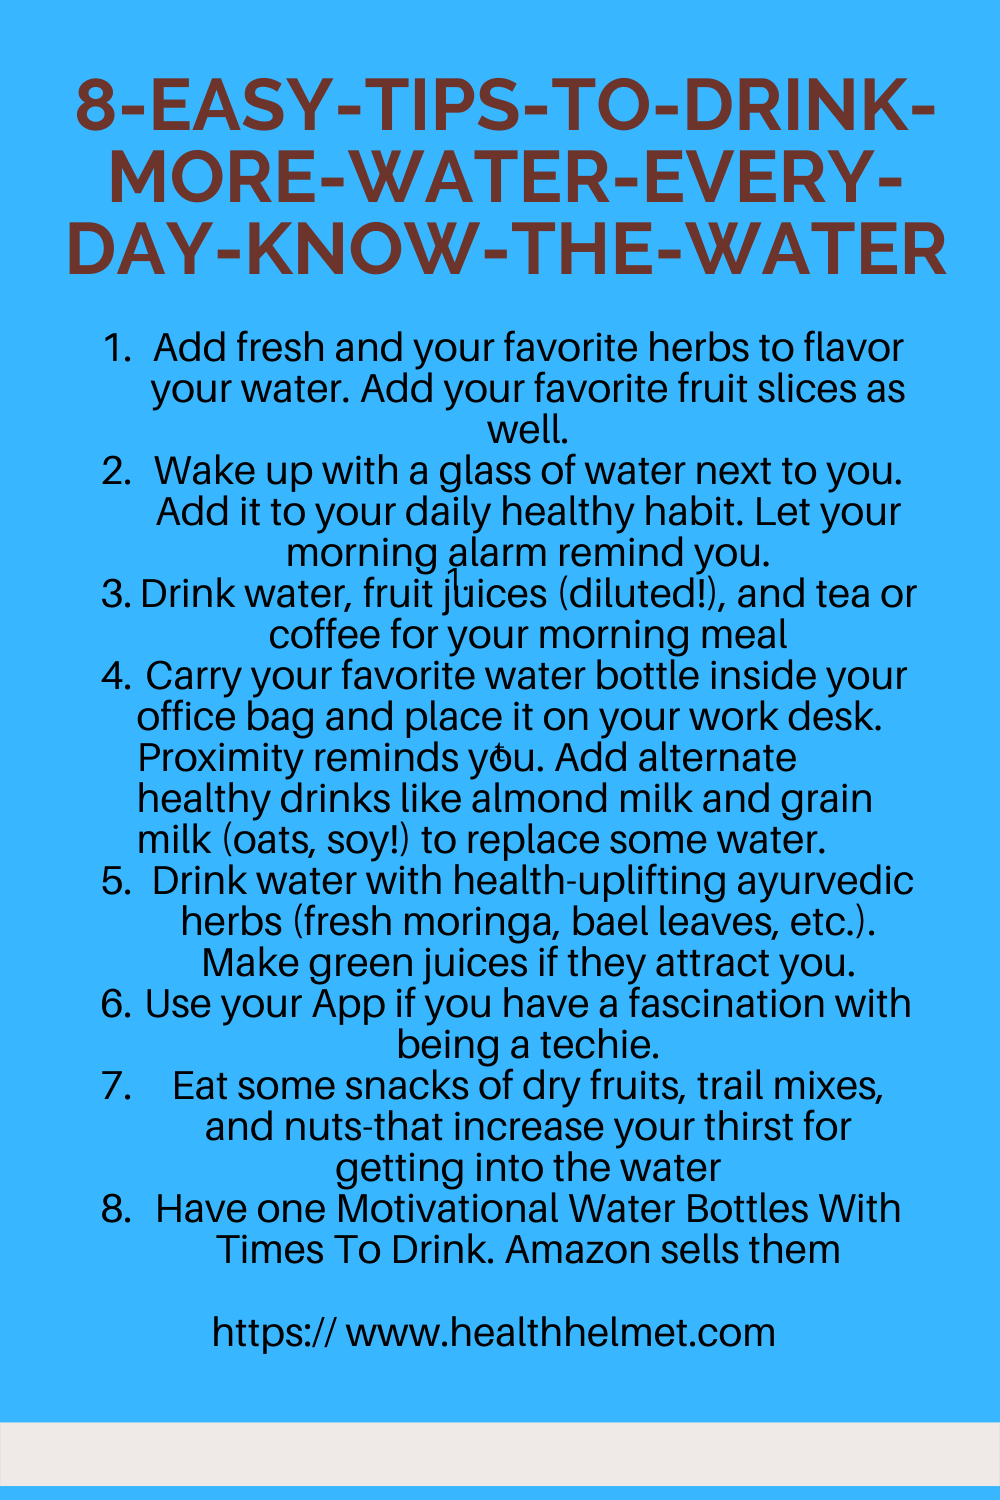 8 Easy Tips to Drink More Water Every Day- Know the Water+